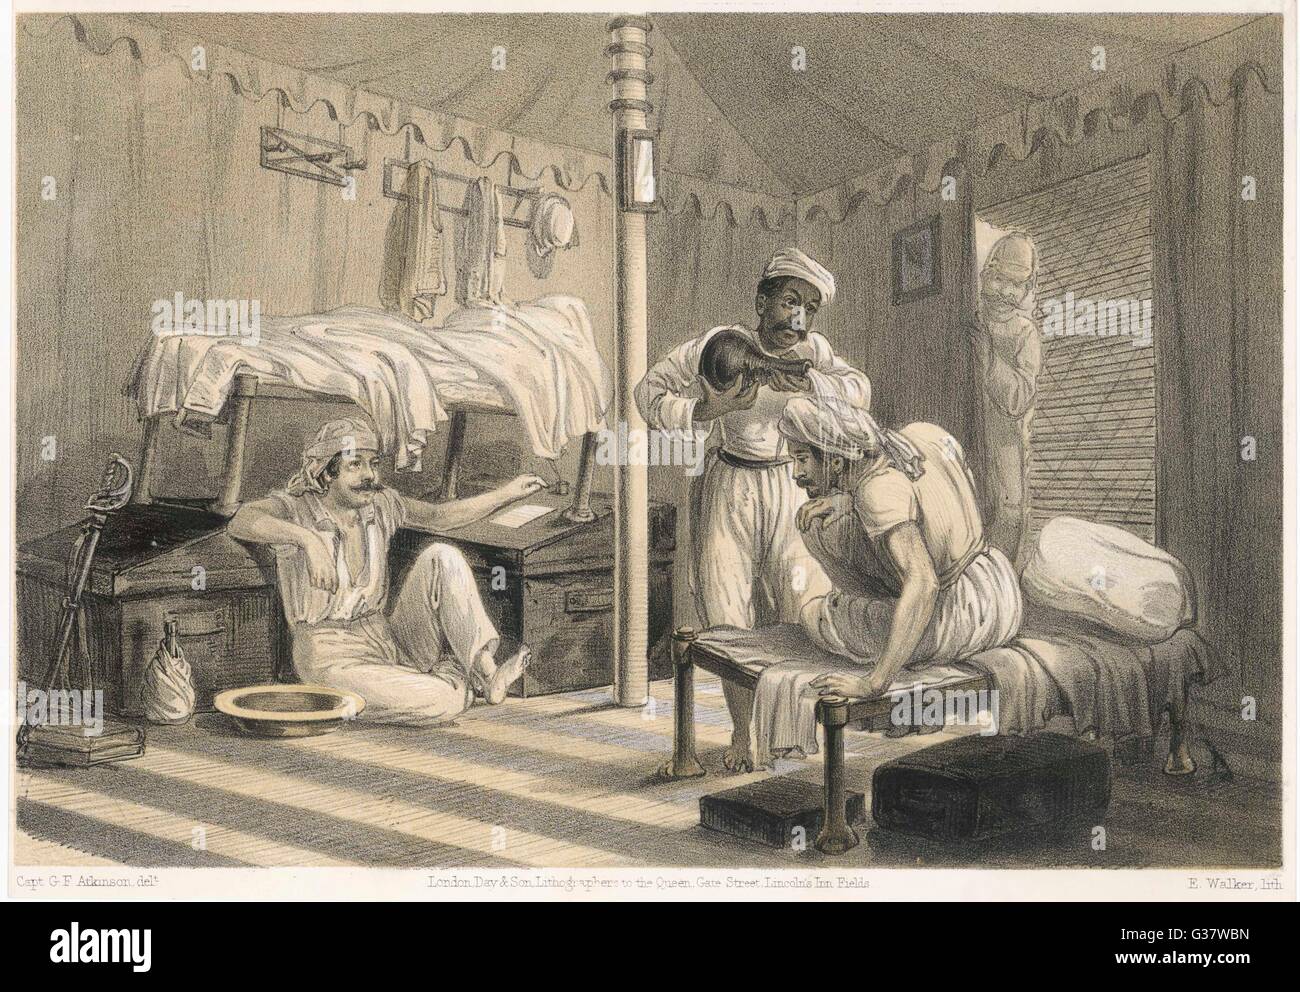 British officers relaxing in their tent during the hottest part of the day in India, 1860, from Curry and Rice (on Forty Plates) by Captain Geo. F. Atkinson.     Date: 1860 Stock Photo